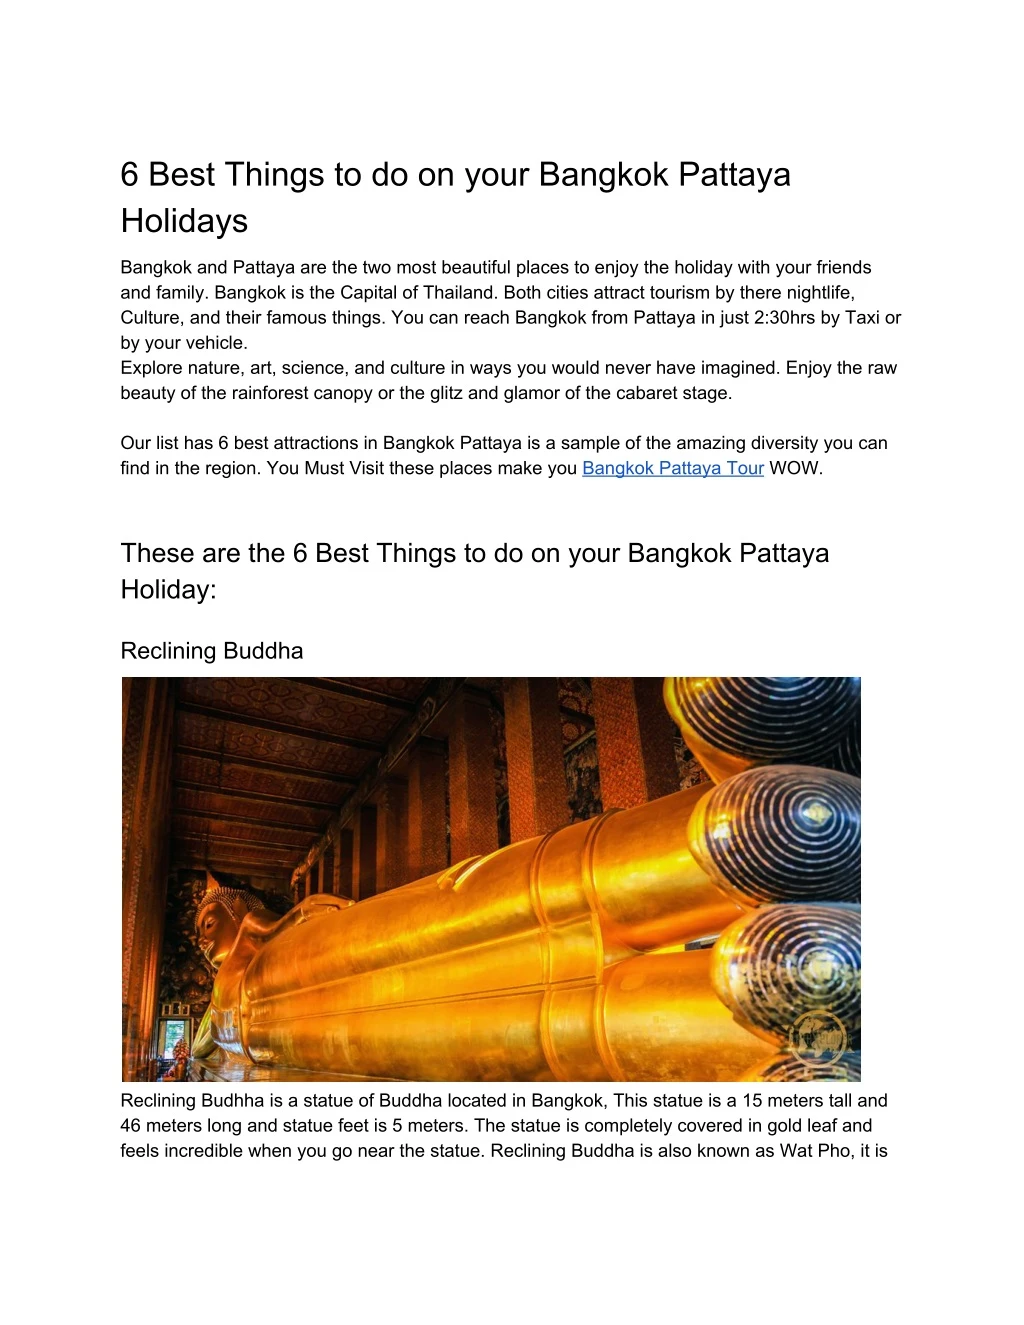 6 best things to do on your bangkok pattaya